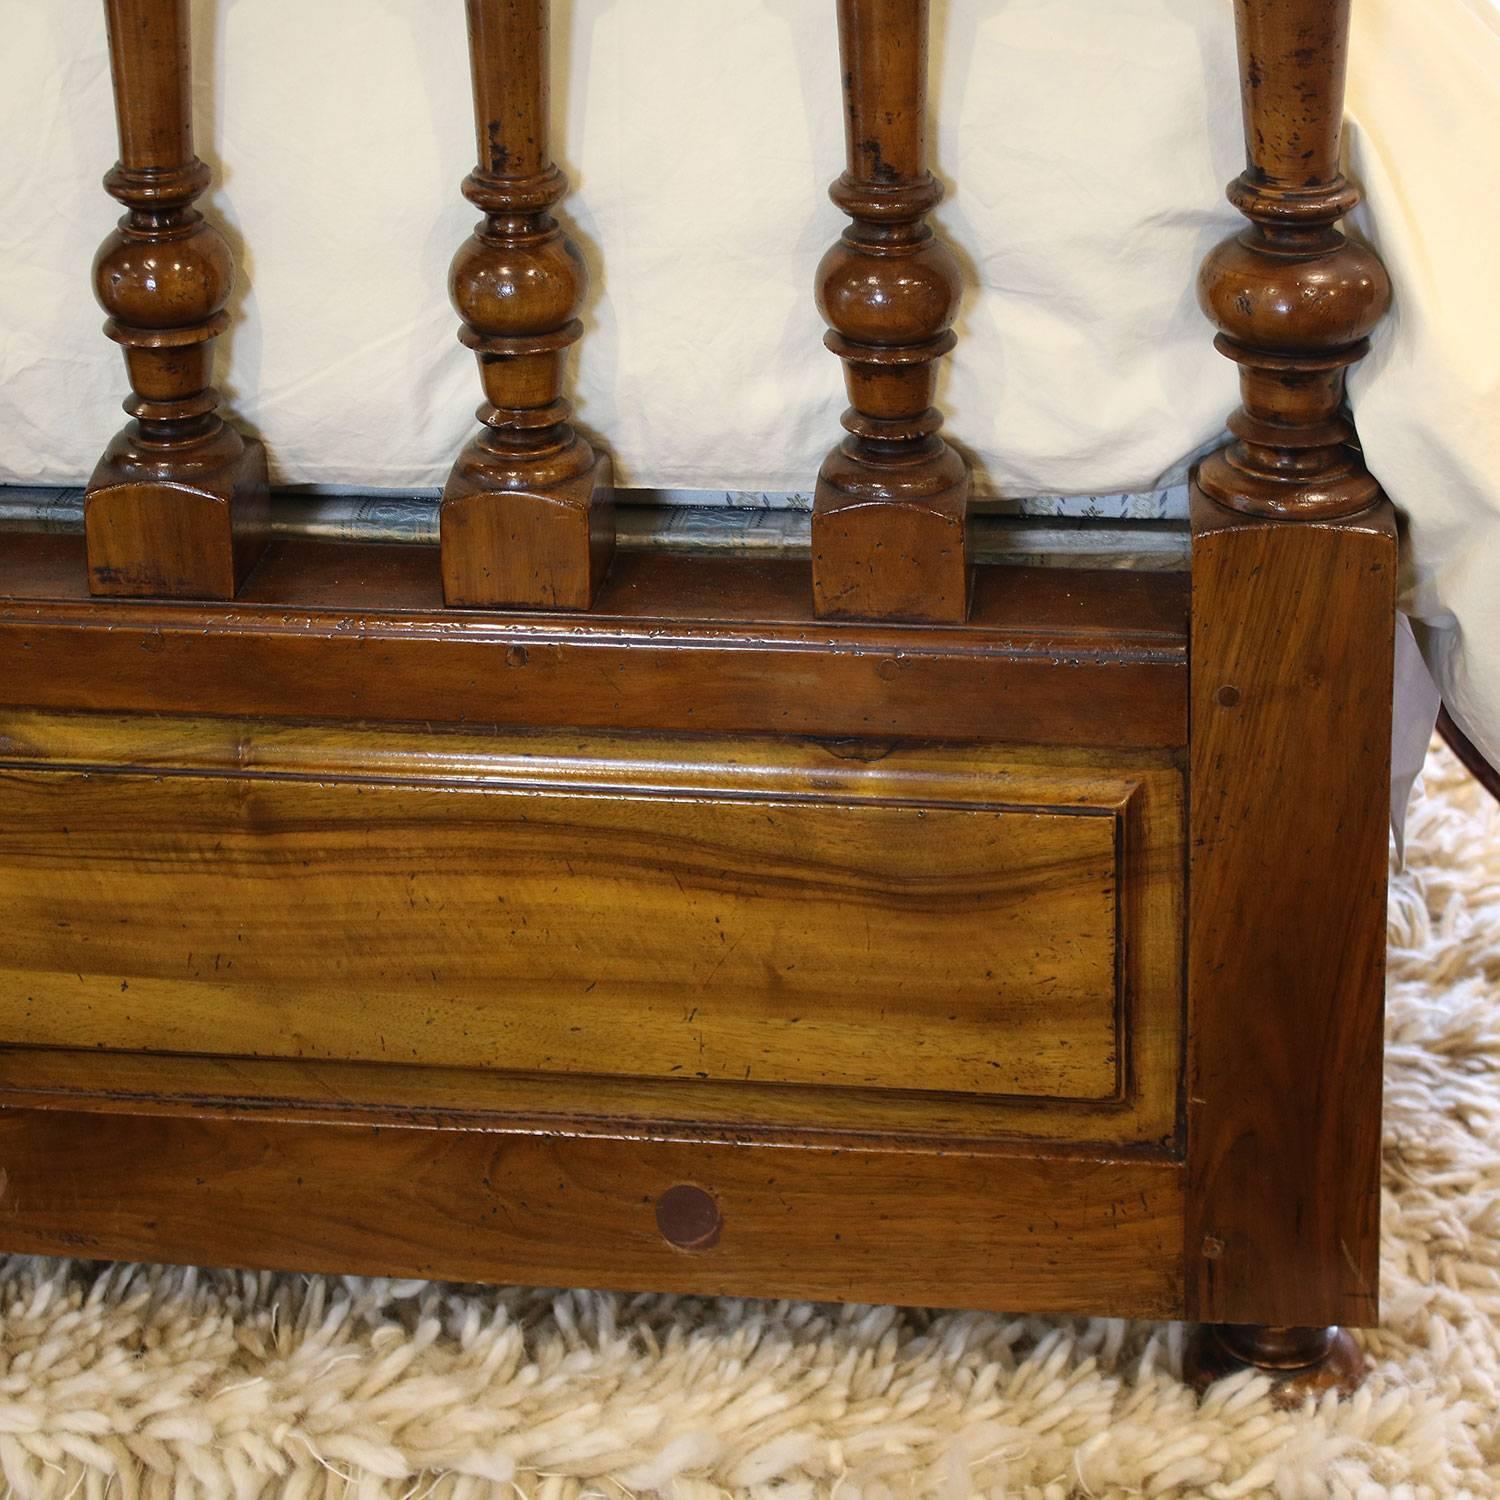 antique spindle bed